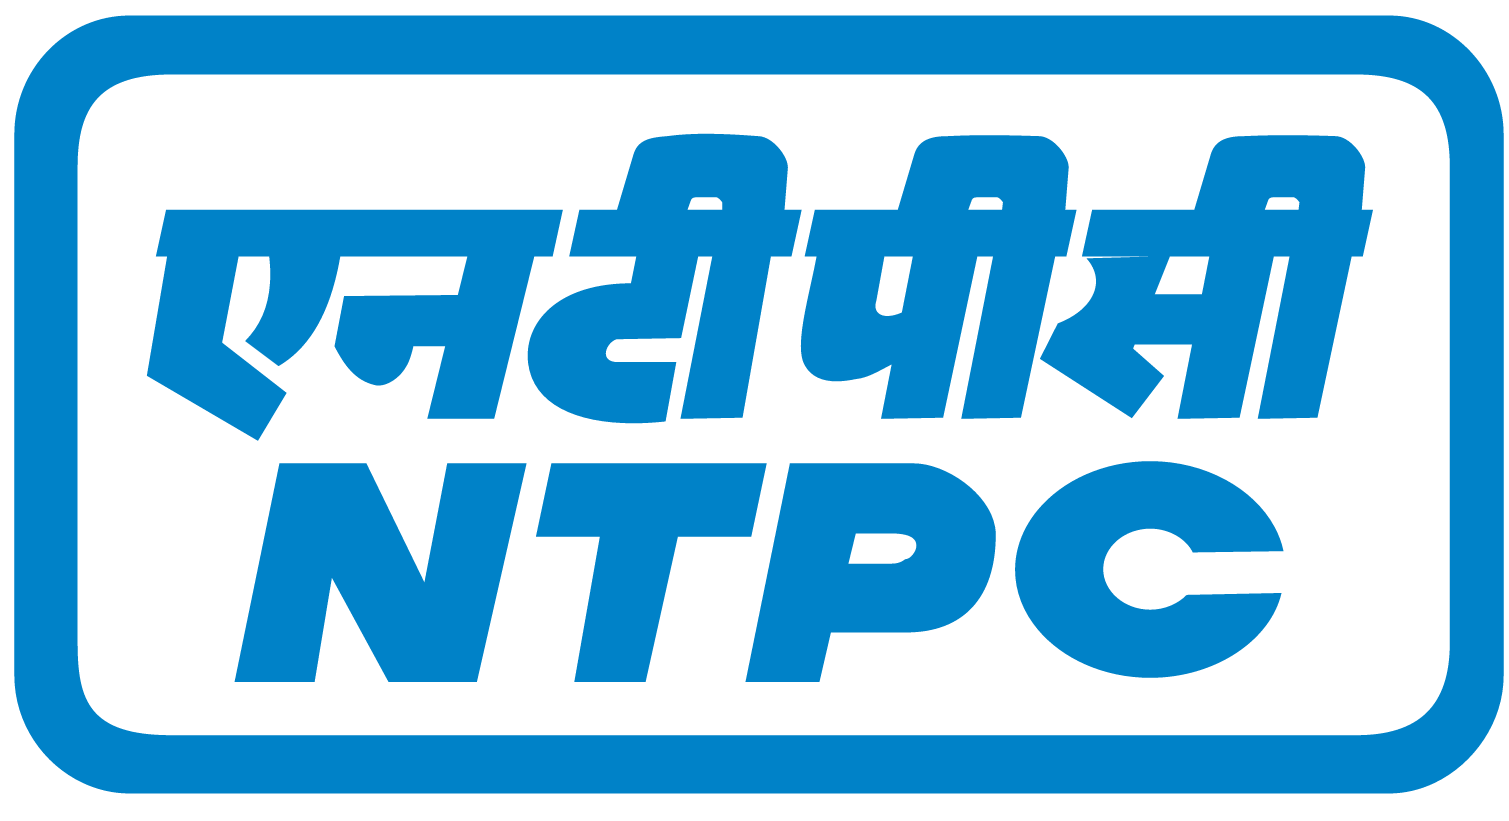 NTPC says its eco-friendly new aggregate will increase the use of ash produced by coal-fired thermal plants in India